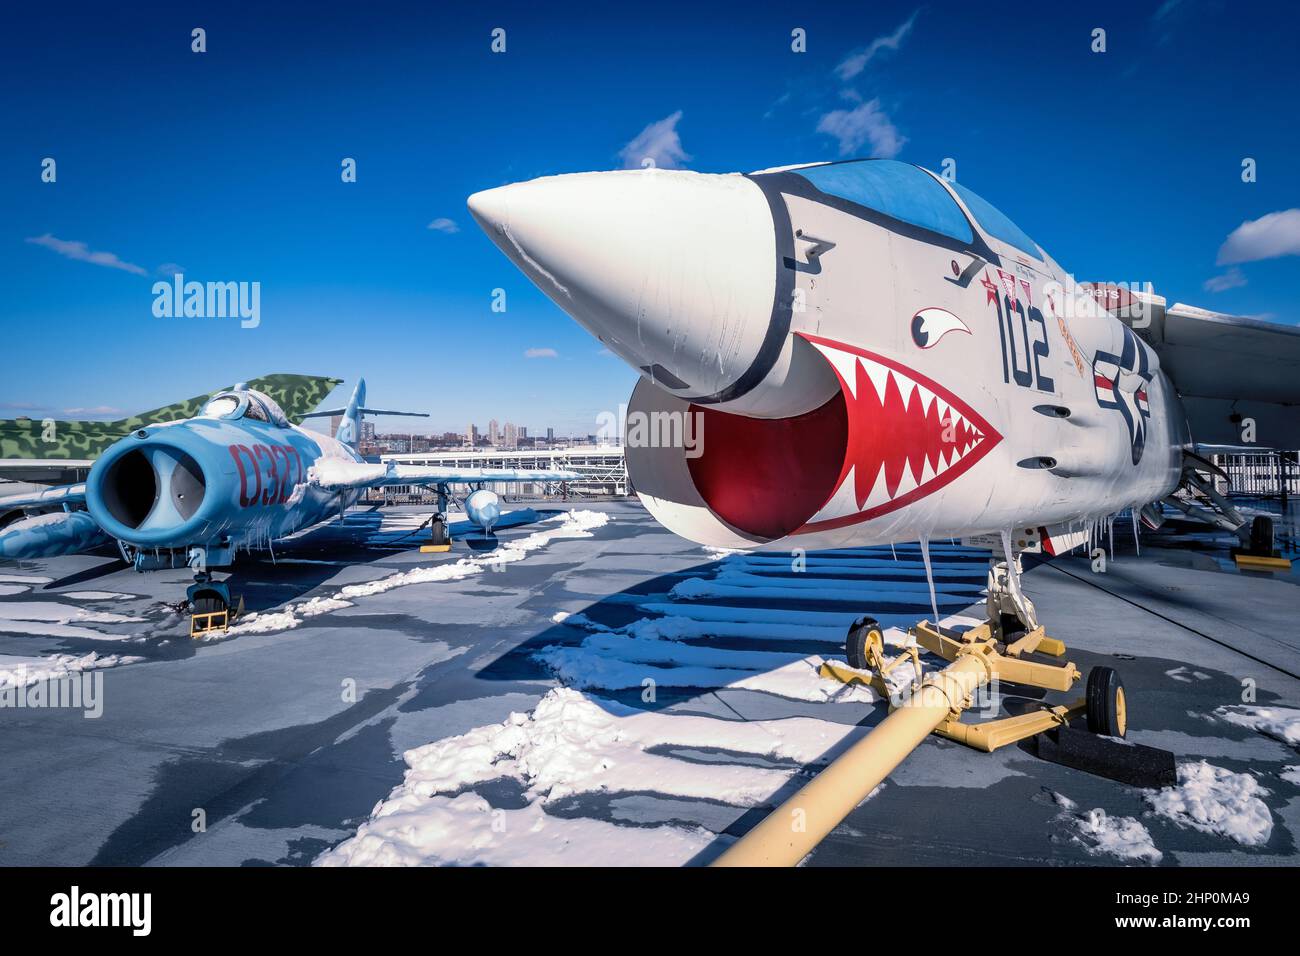 During the cold war defected MiG 17 side-by-side an American F-8 Corsair on the flight deck of USS Intrepid Sea, Air and Space Museum in NYC, NY, USA Stock Photo